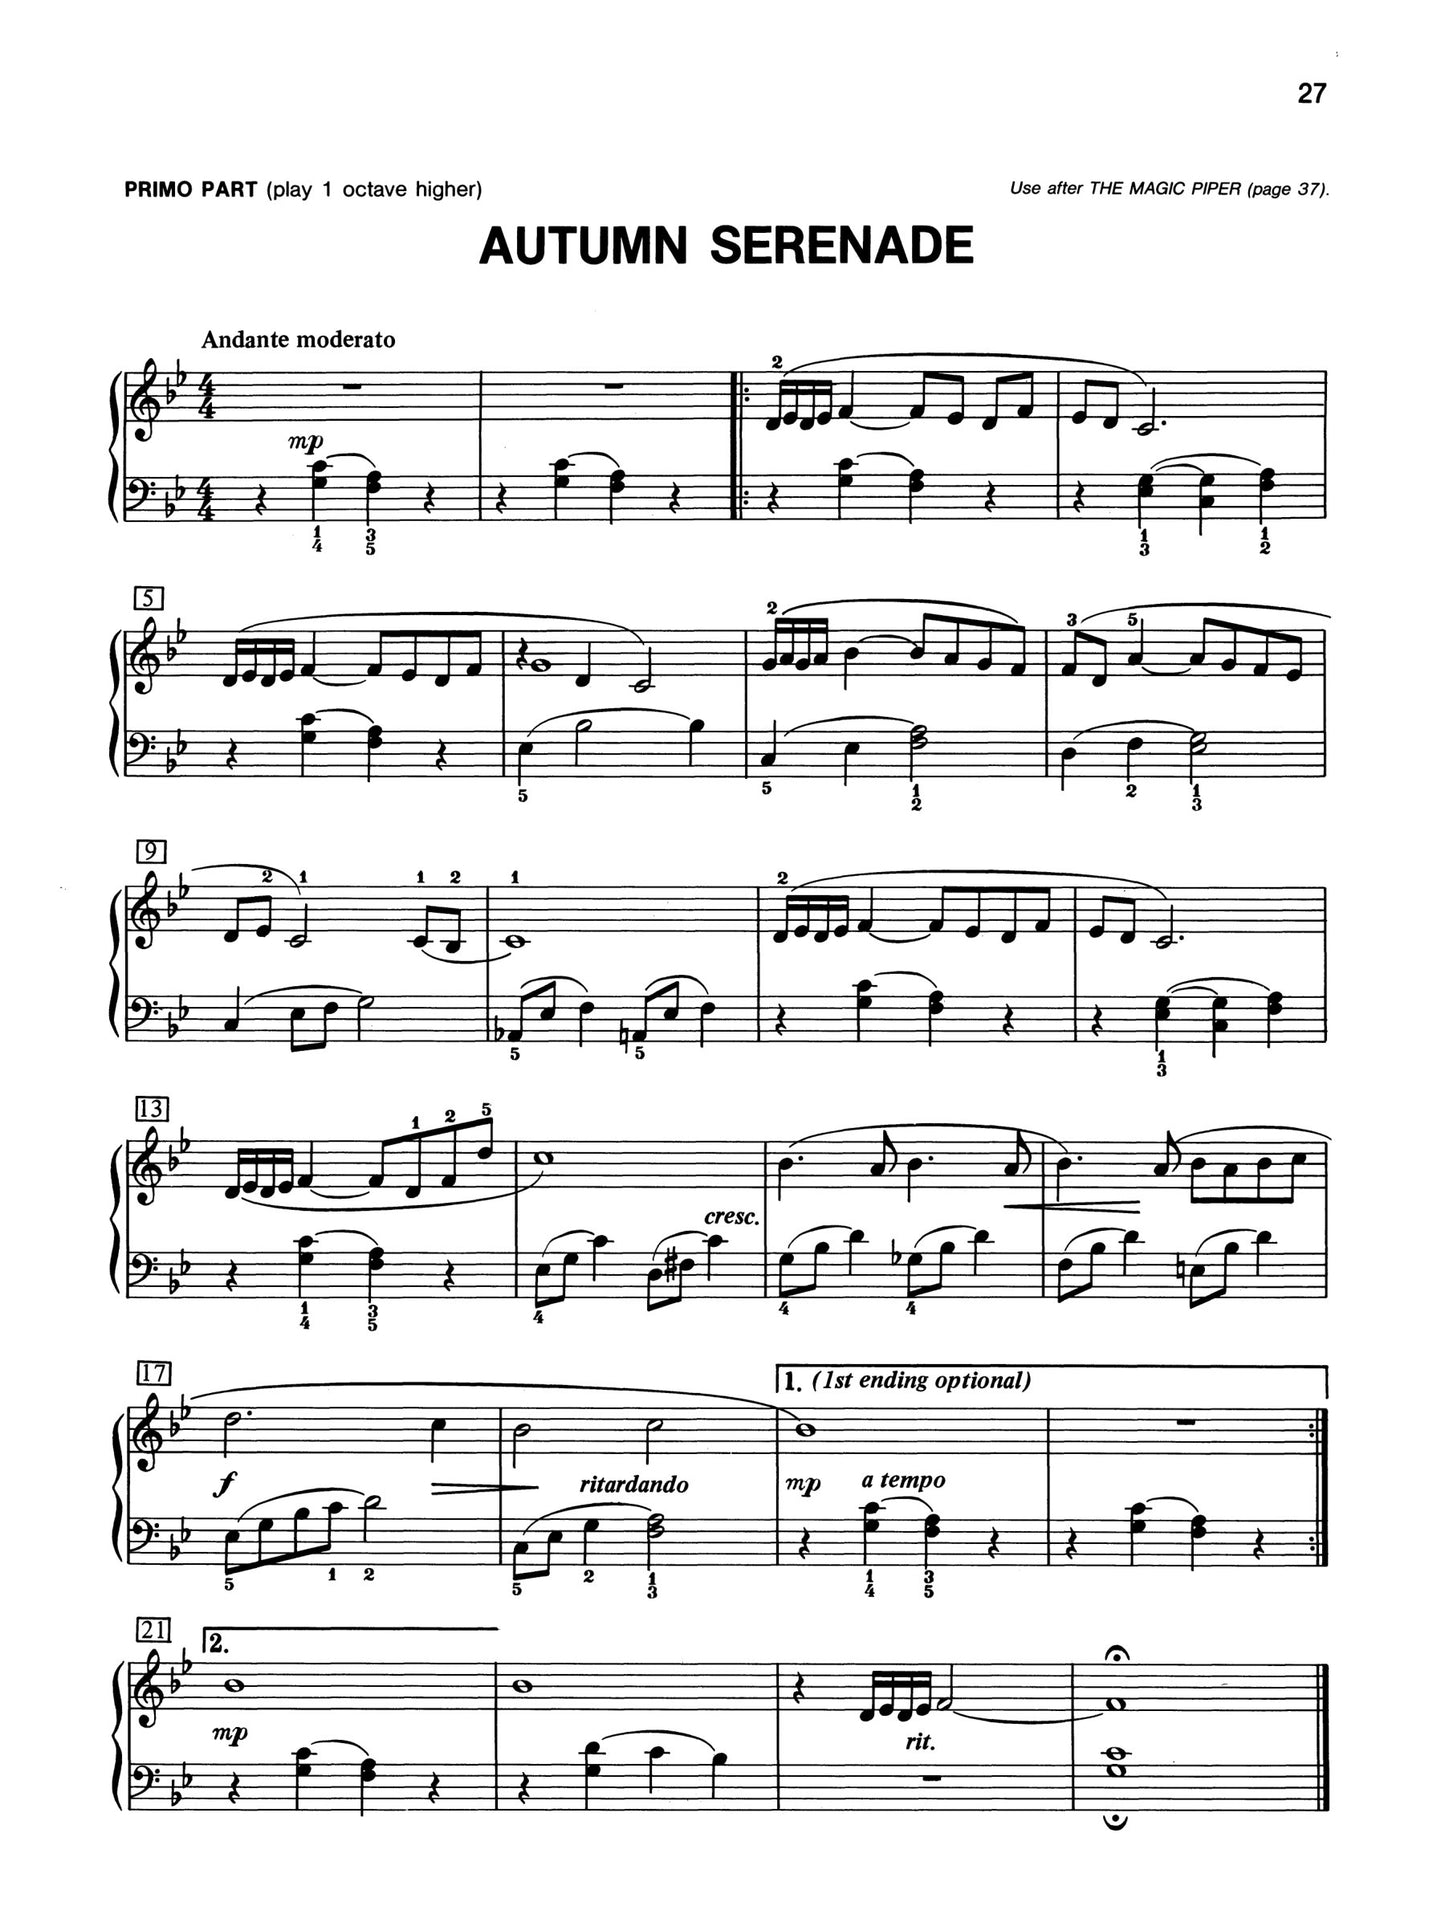 Alfred's Basic Piano Library - Duet Book Level 4